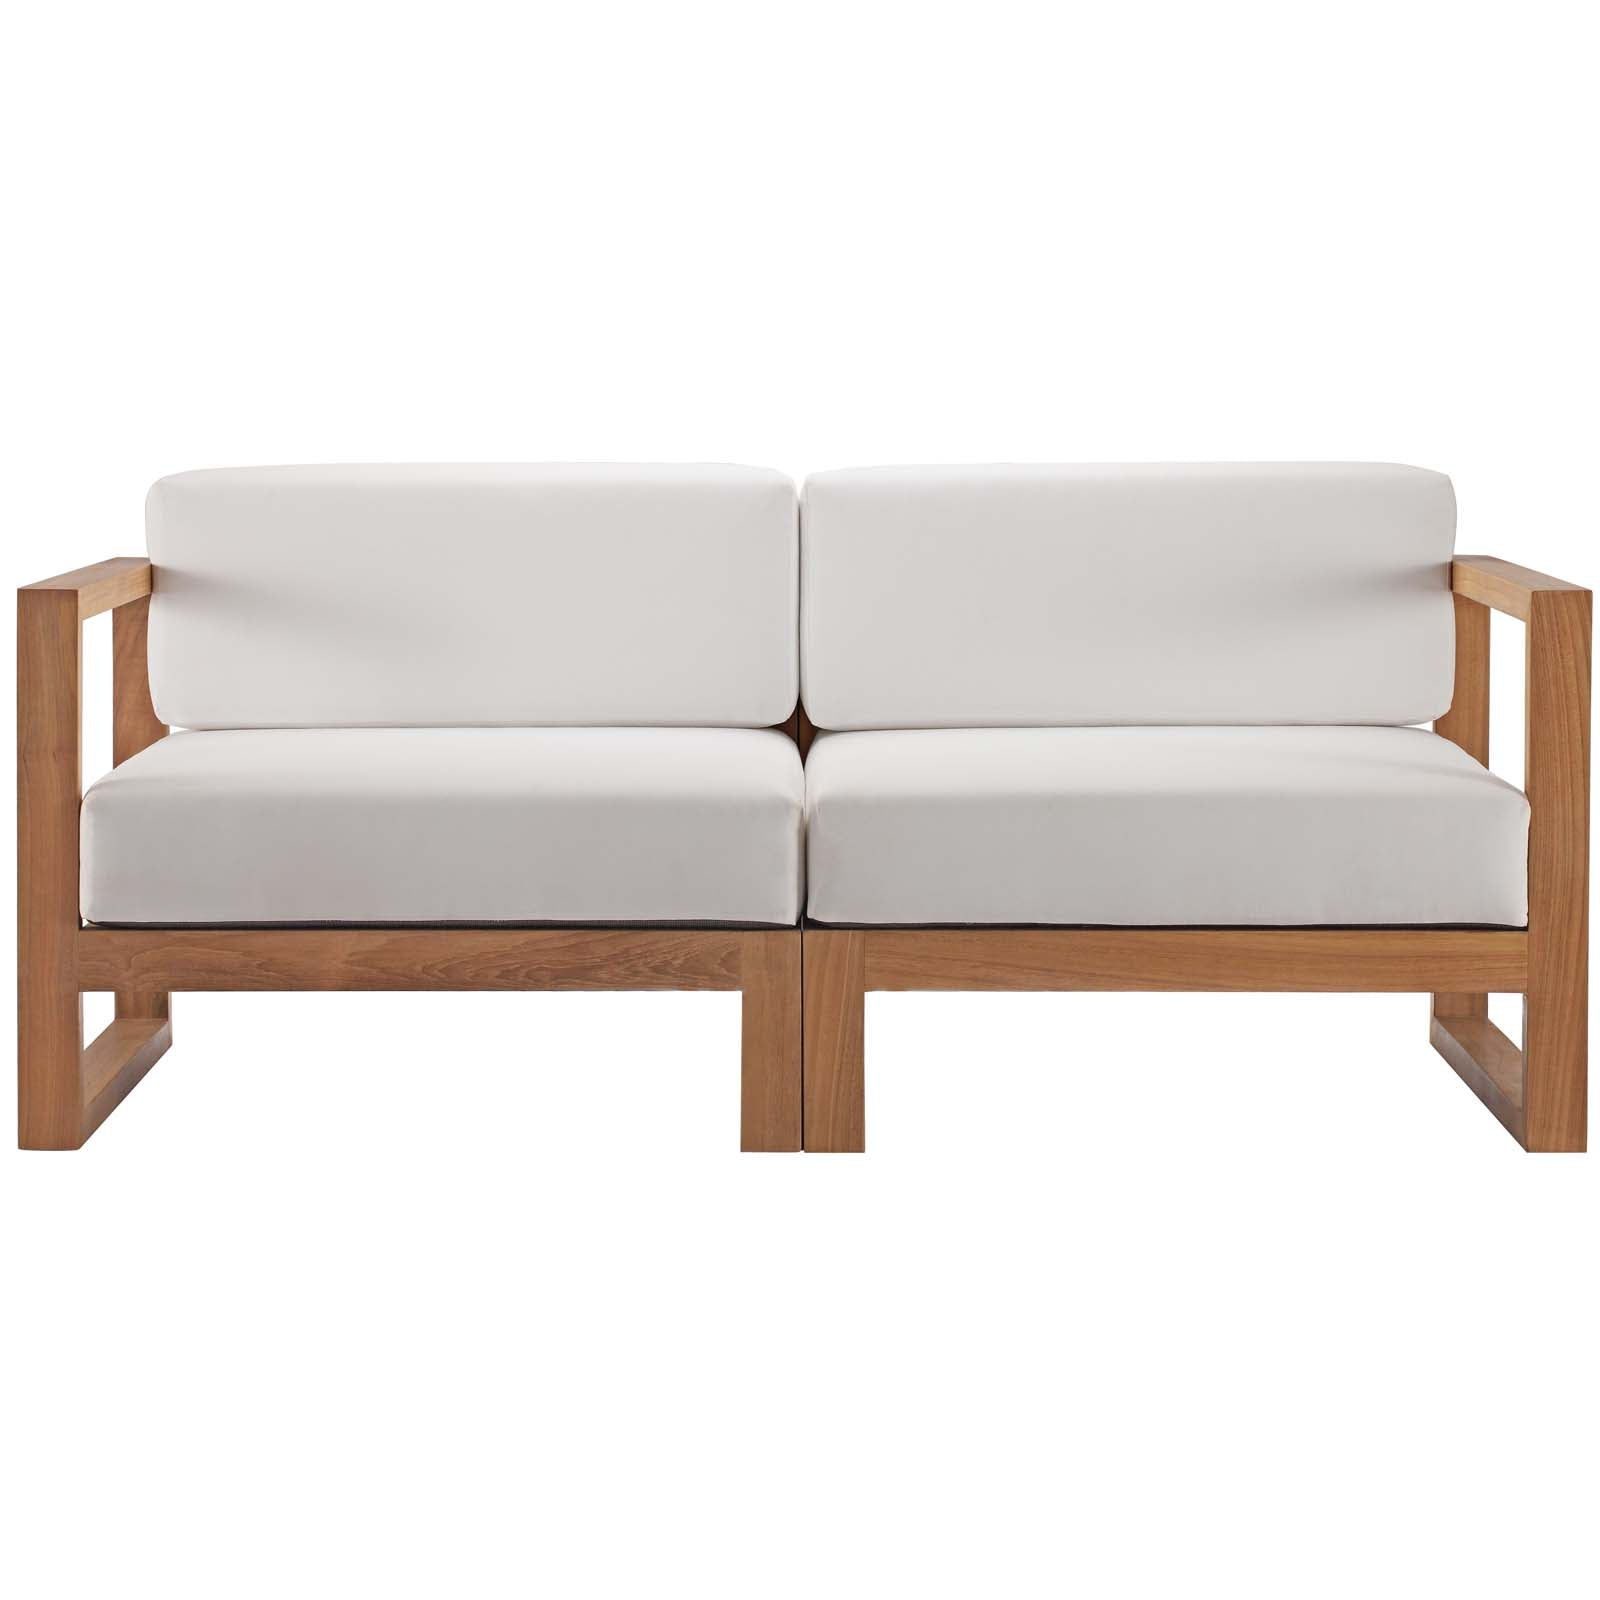 Upland Outdoor Patio Teak Wood 2-Piece Sectional Sofa Loveseat-Outdoor Sectional-Modway-Wall2Wall Furnishings